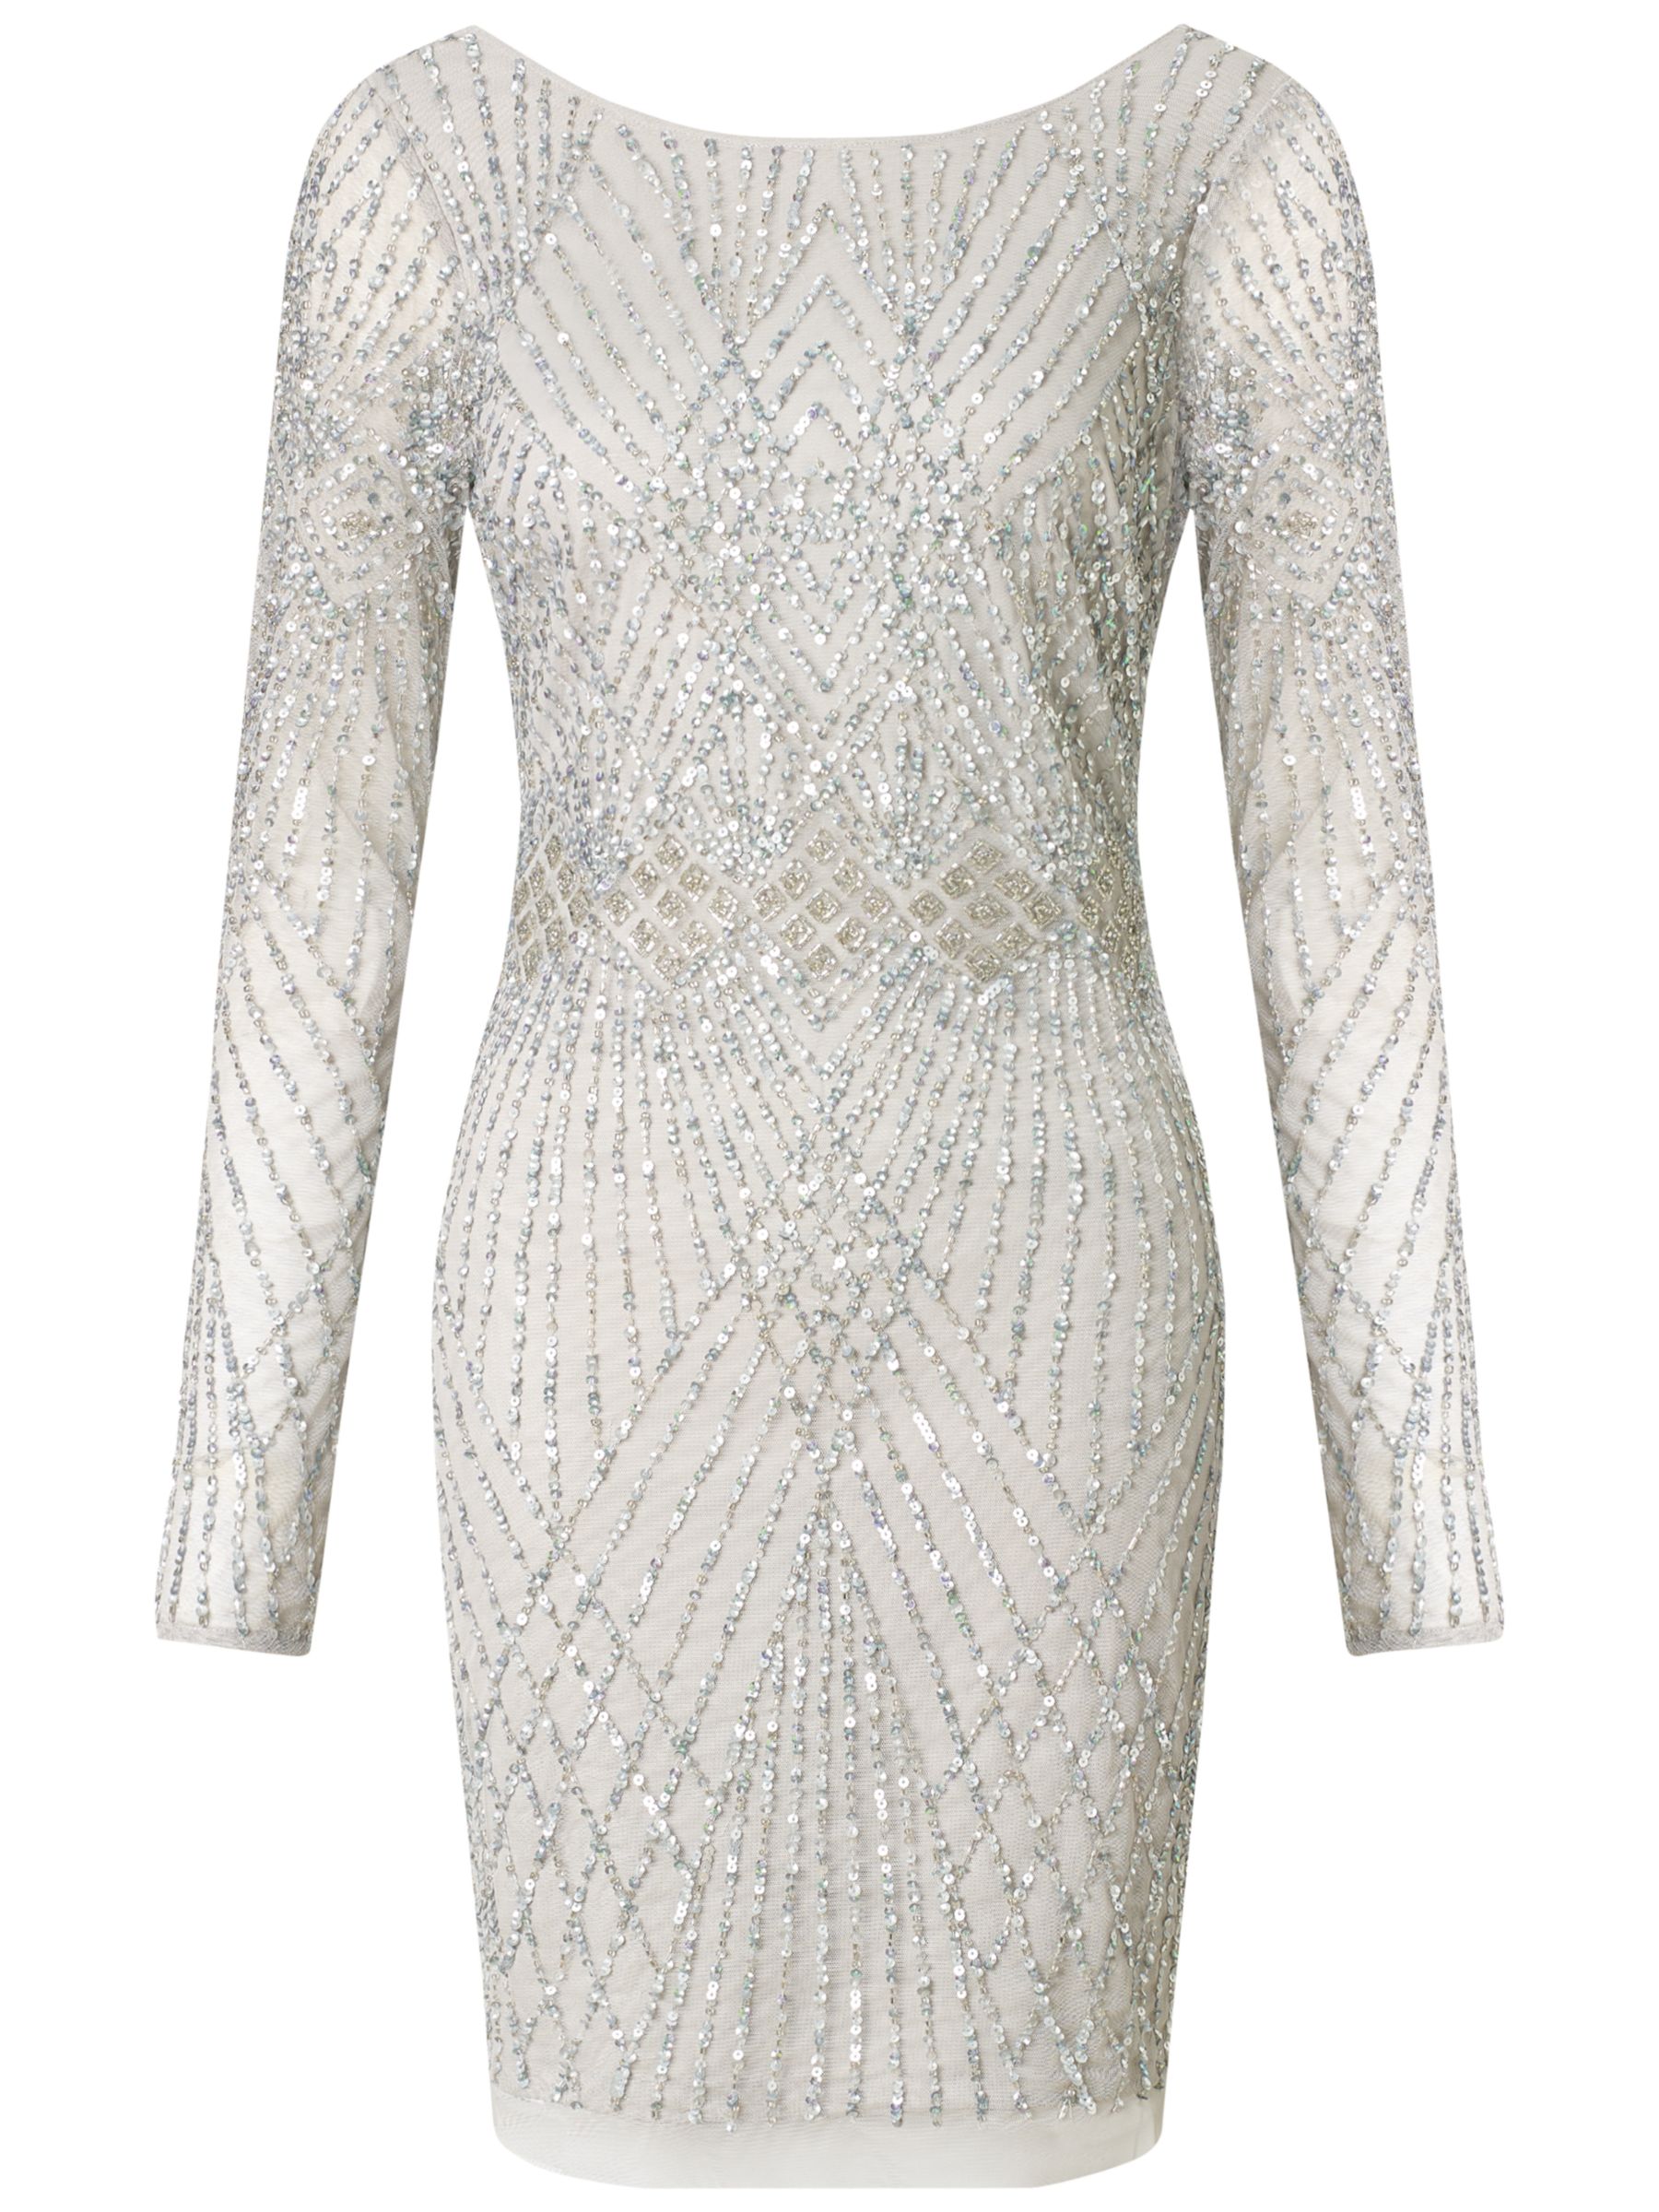 long sleeve silver cocktail dress